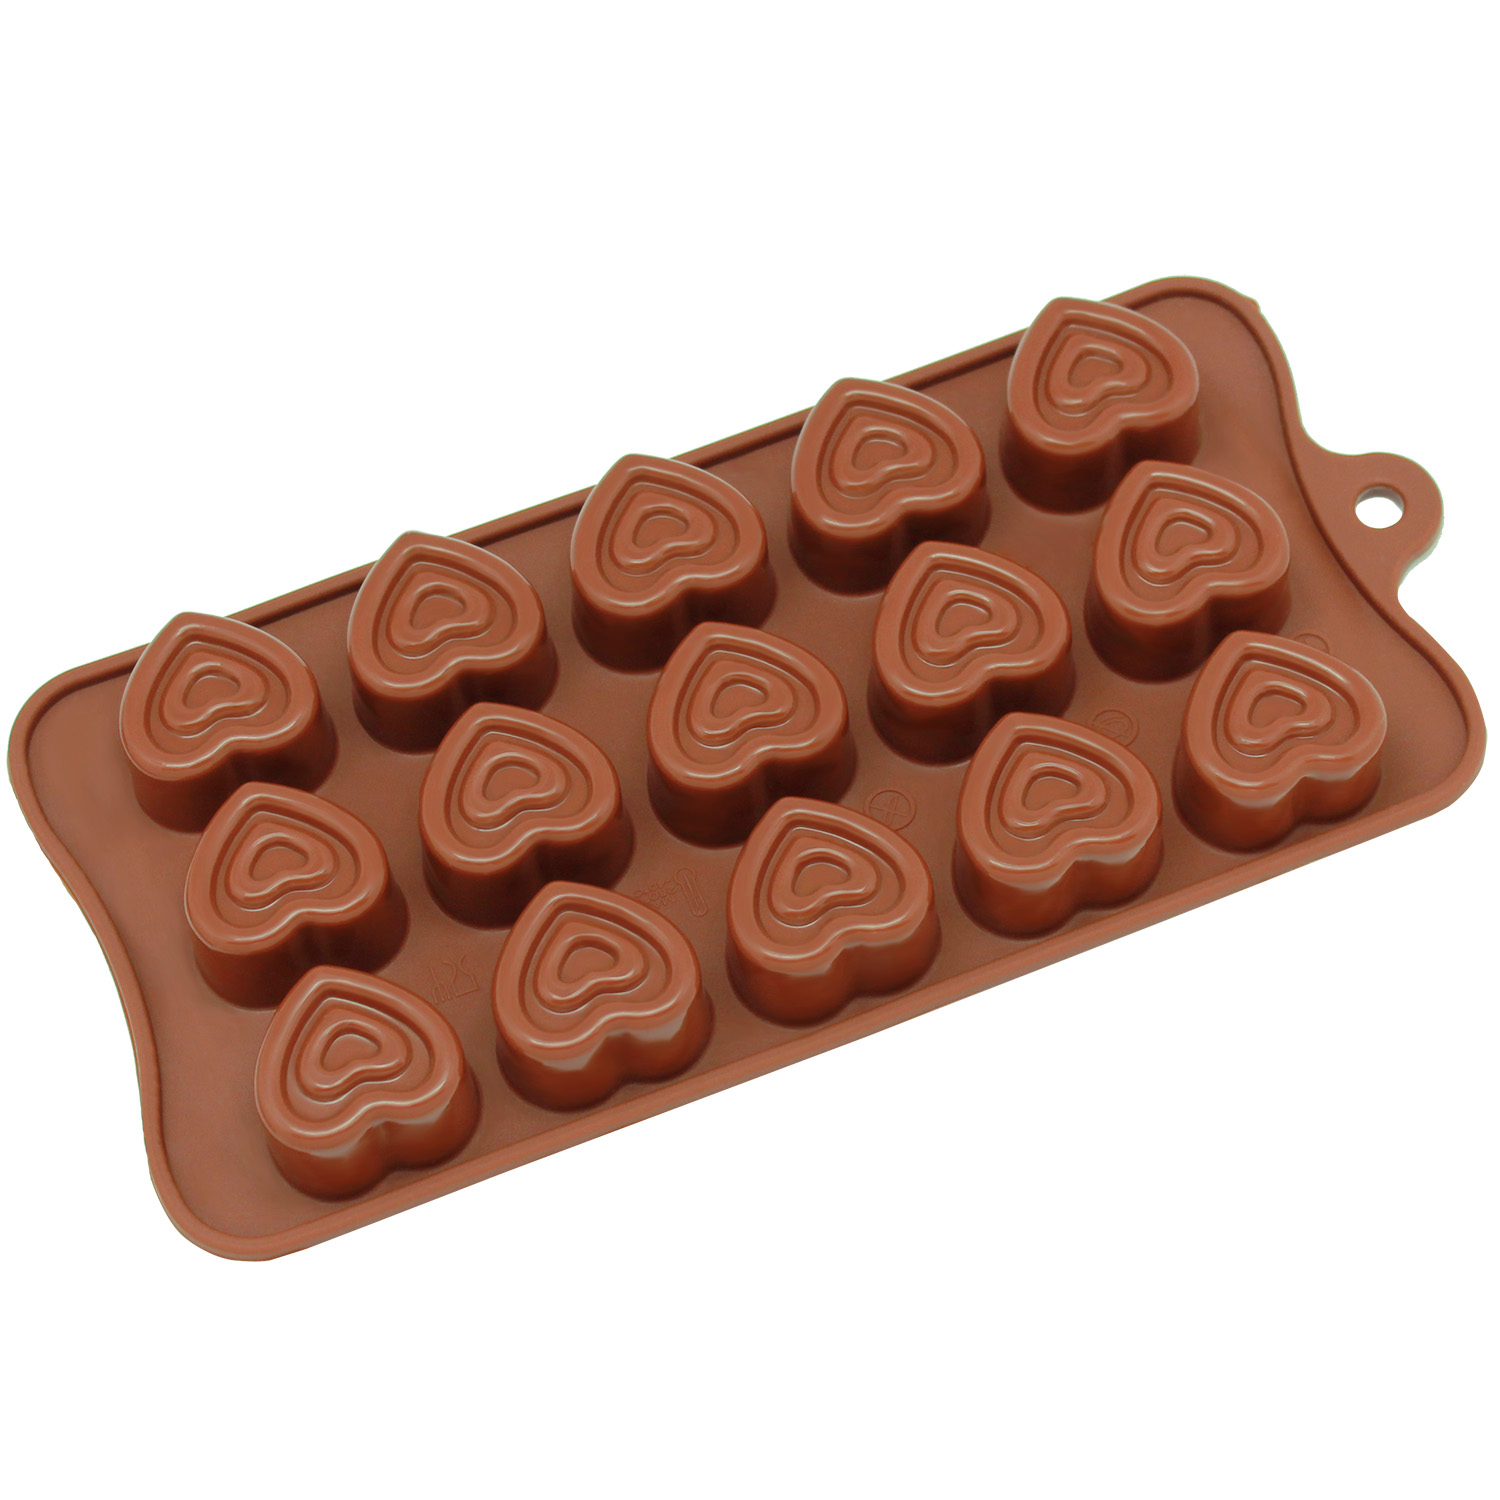 Freshware Silicone Mold, Chocolate Mold, Candy Mold, Ice Mold, Soap Mold for Chocolate, Candy and Gummy, Double Heart, 15-Cavity